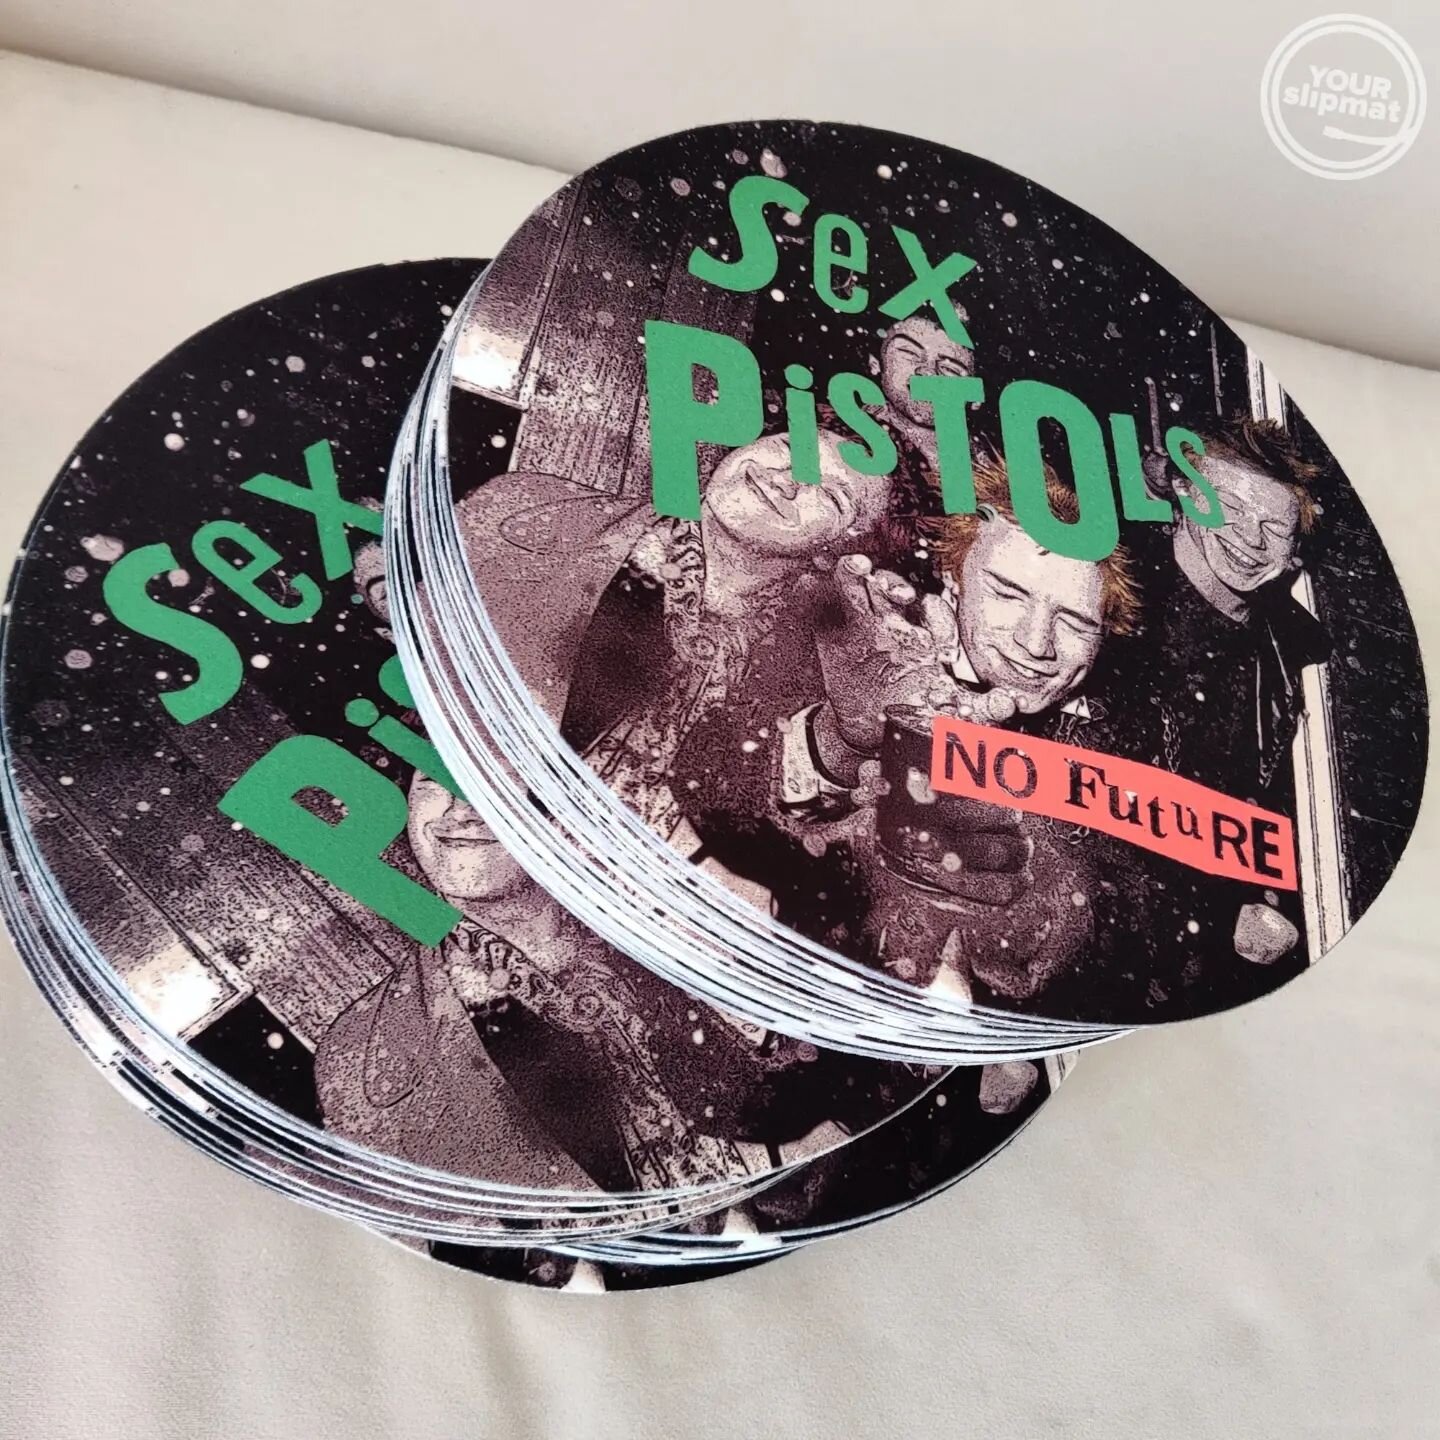 Full color 12&quot; slipmats for the legendary Sex Pistols 🔫🔥no further introduction needed 😎 #sexpistolsslipmats #customslipmat #slipmats #technics1210 #sexpistols #yourslipmat #12inchslipmats #turntablemat